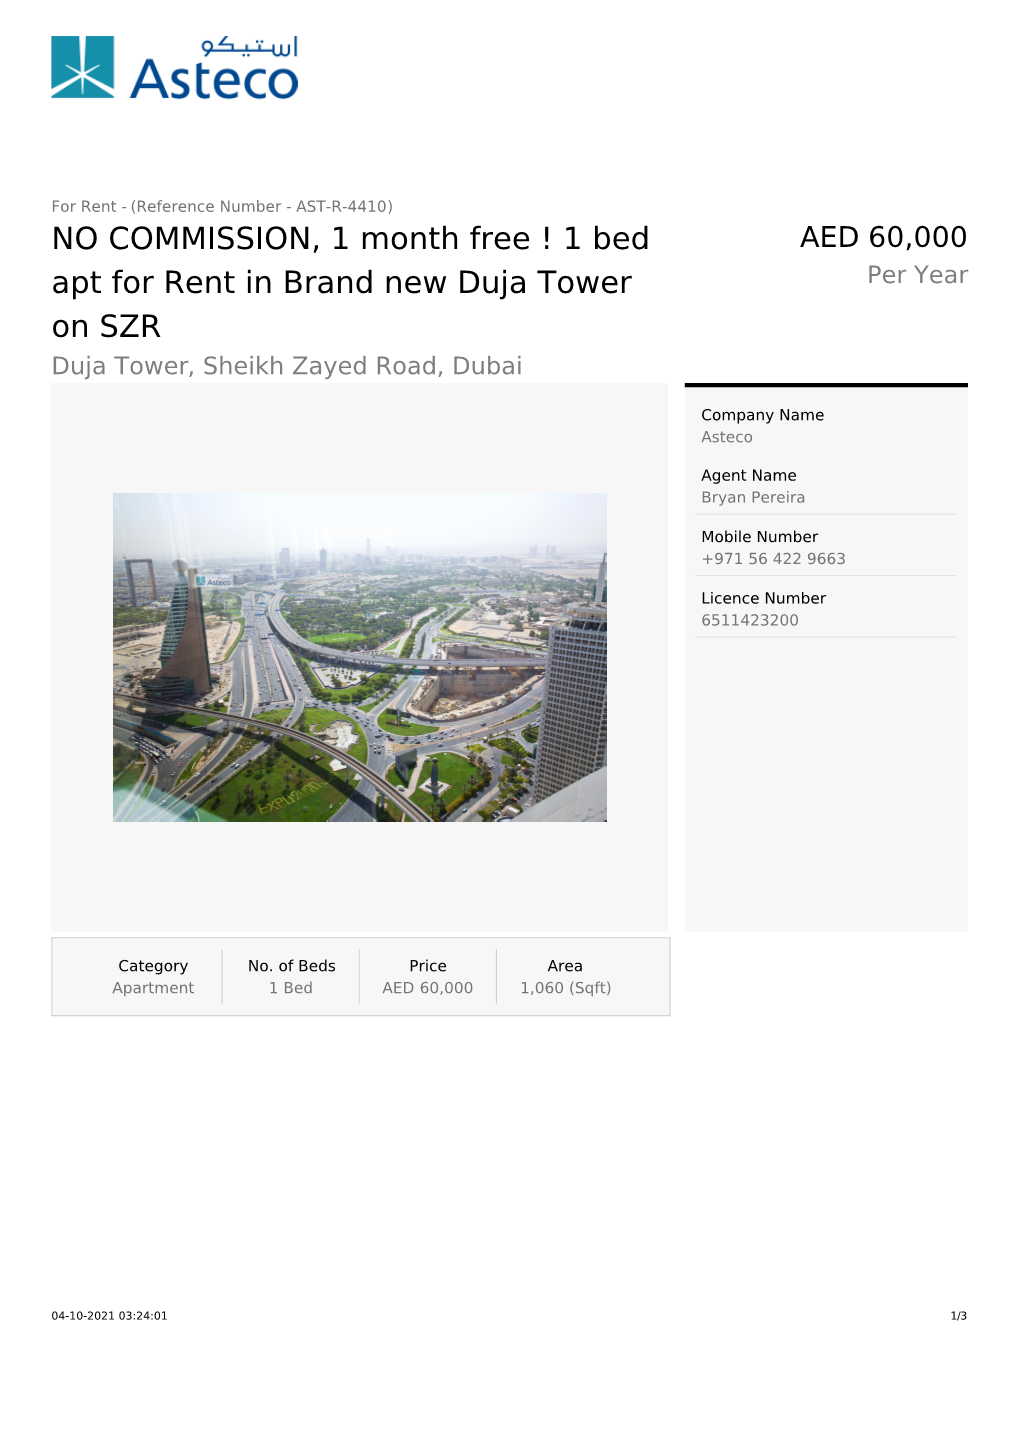 1 Bed Apt for Rent in Brand New Duja Tower On